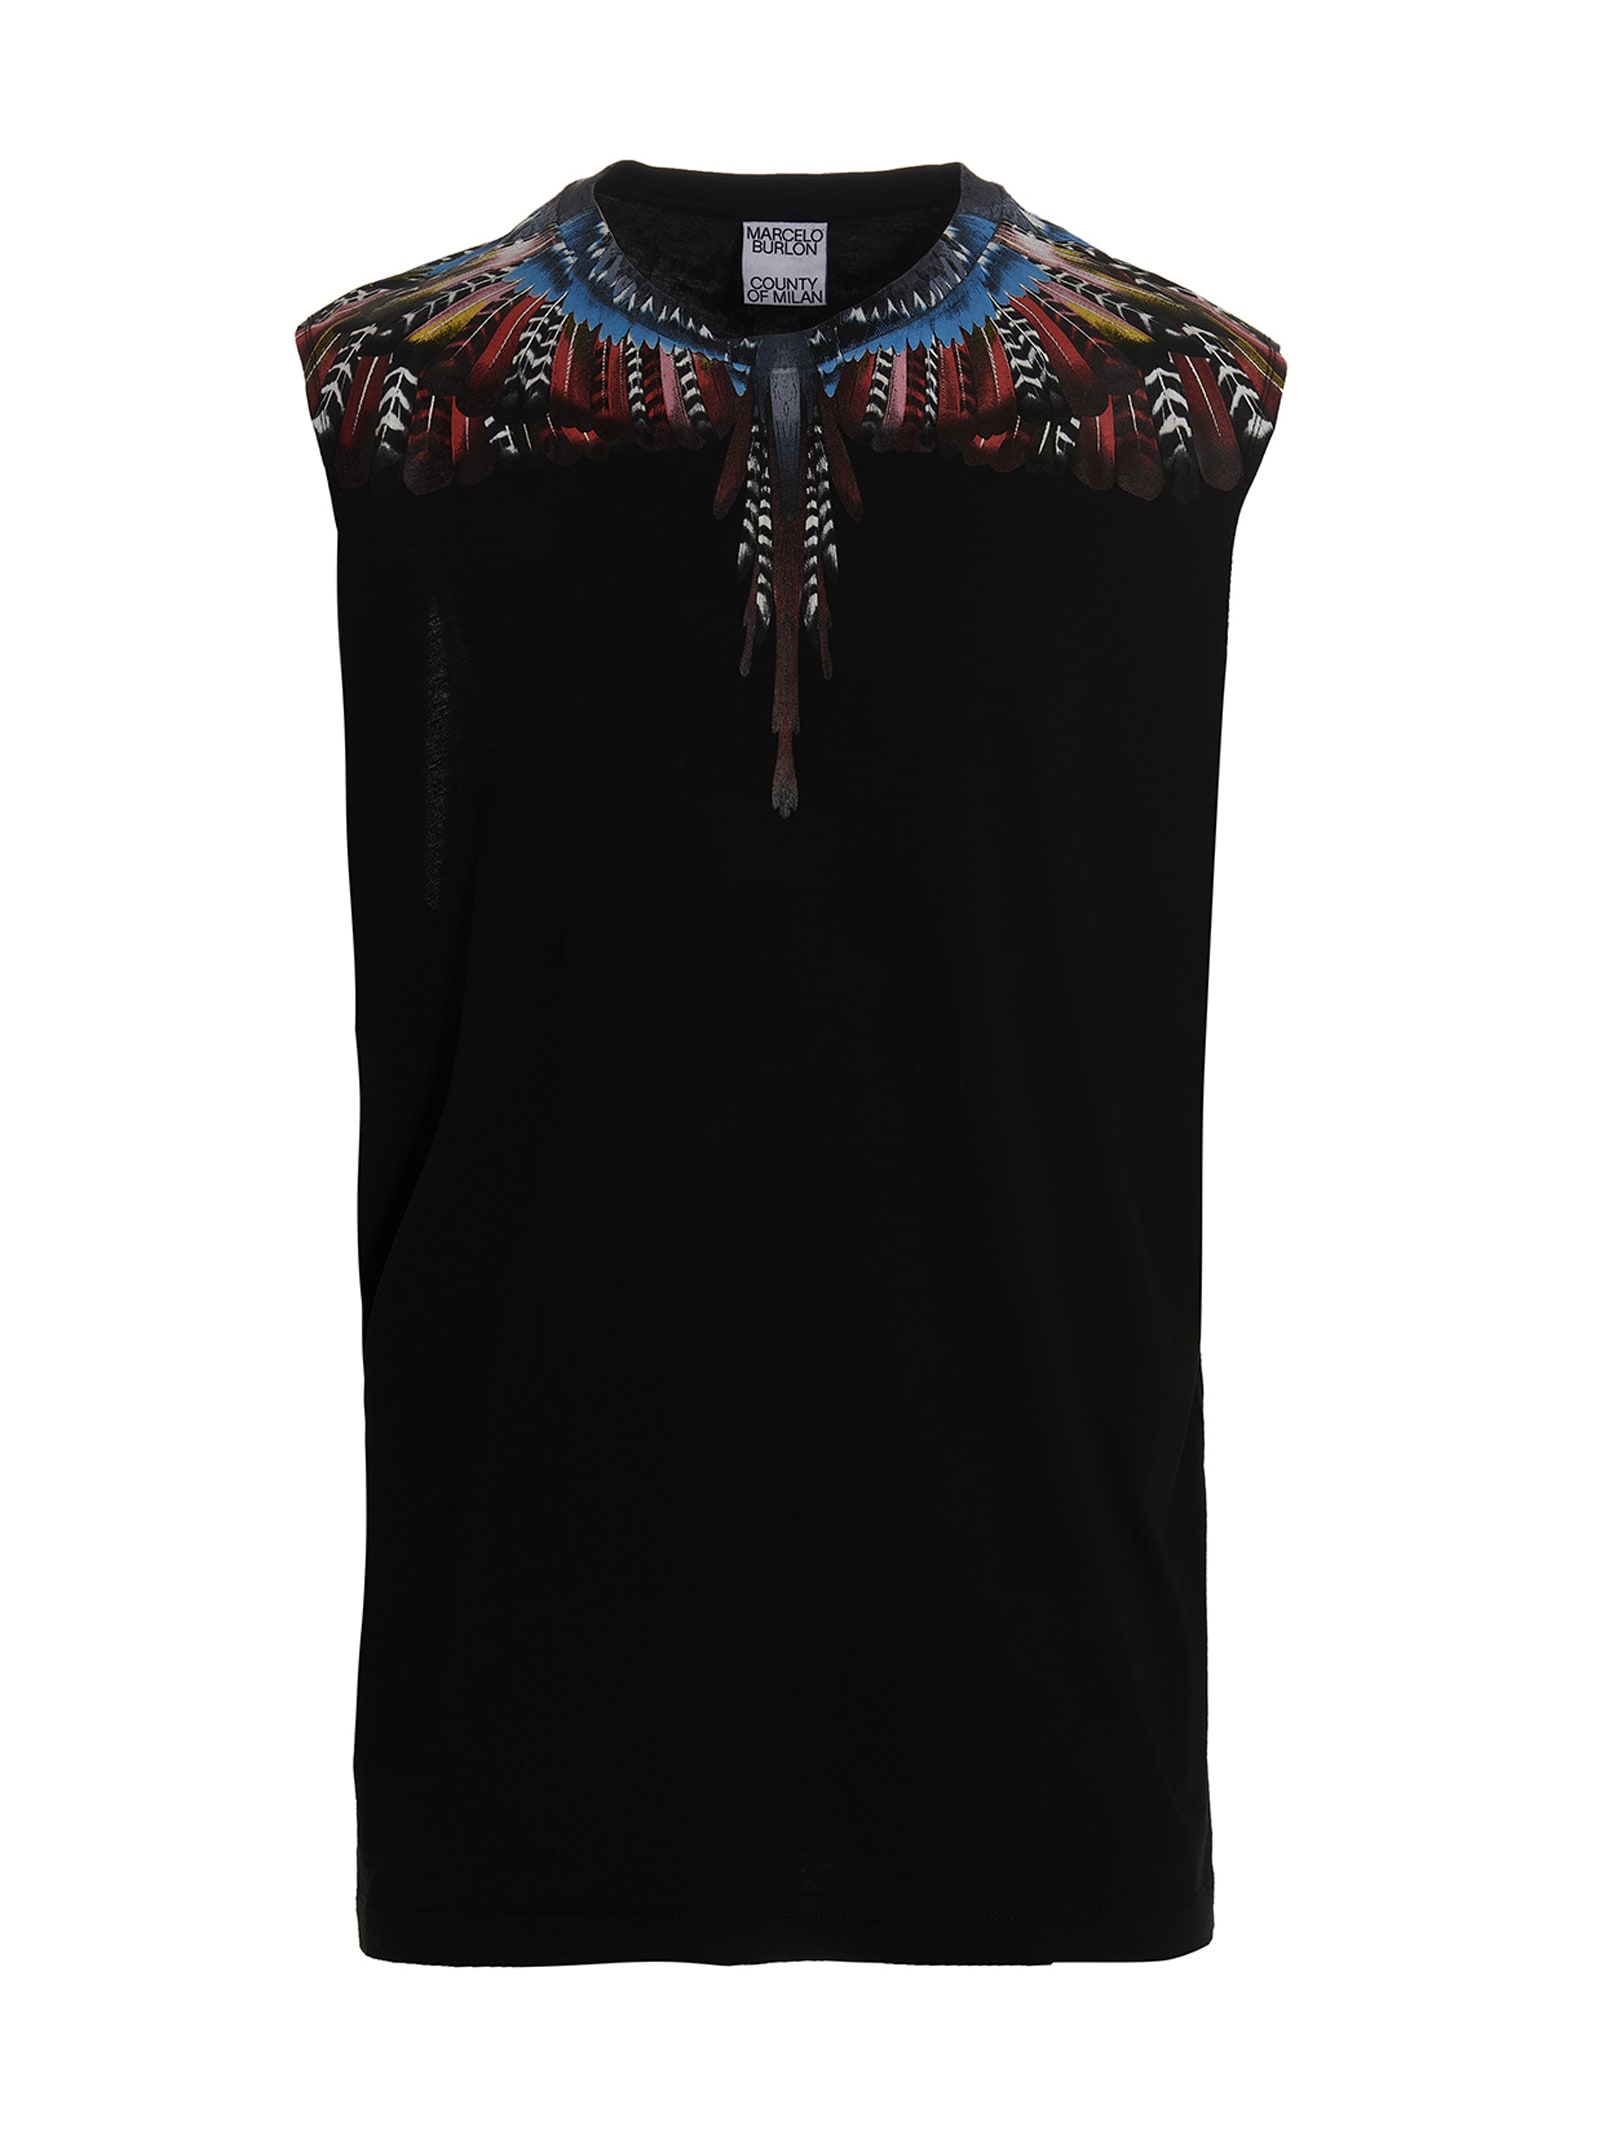 MARCELO BURLON COUNTY OF MILAN TANK TOP GRIZZLY WINGS